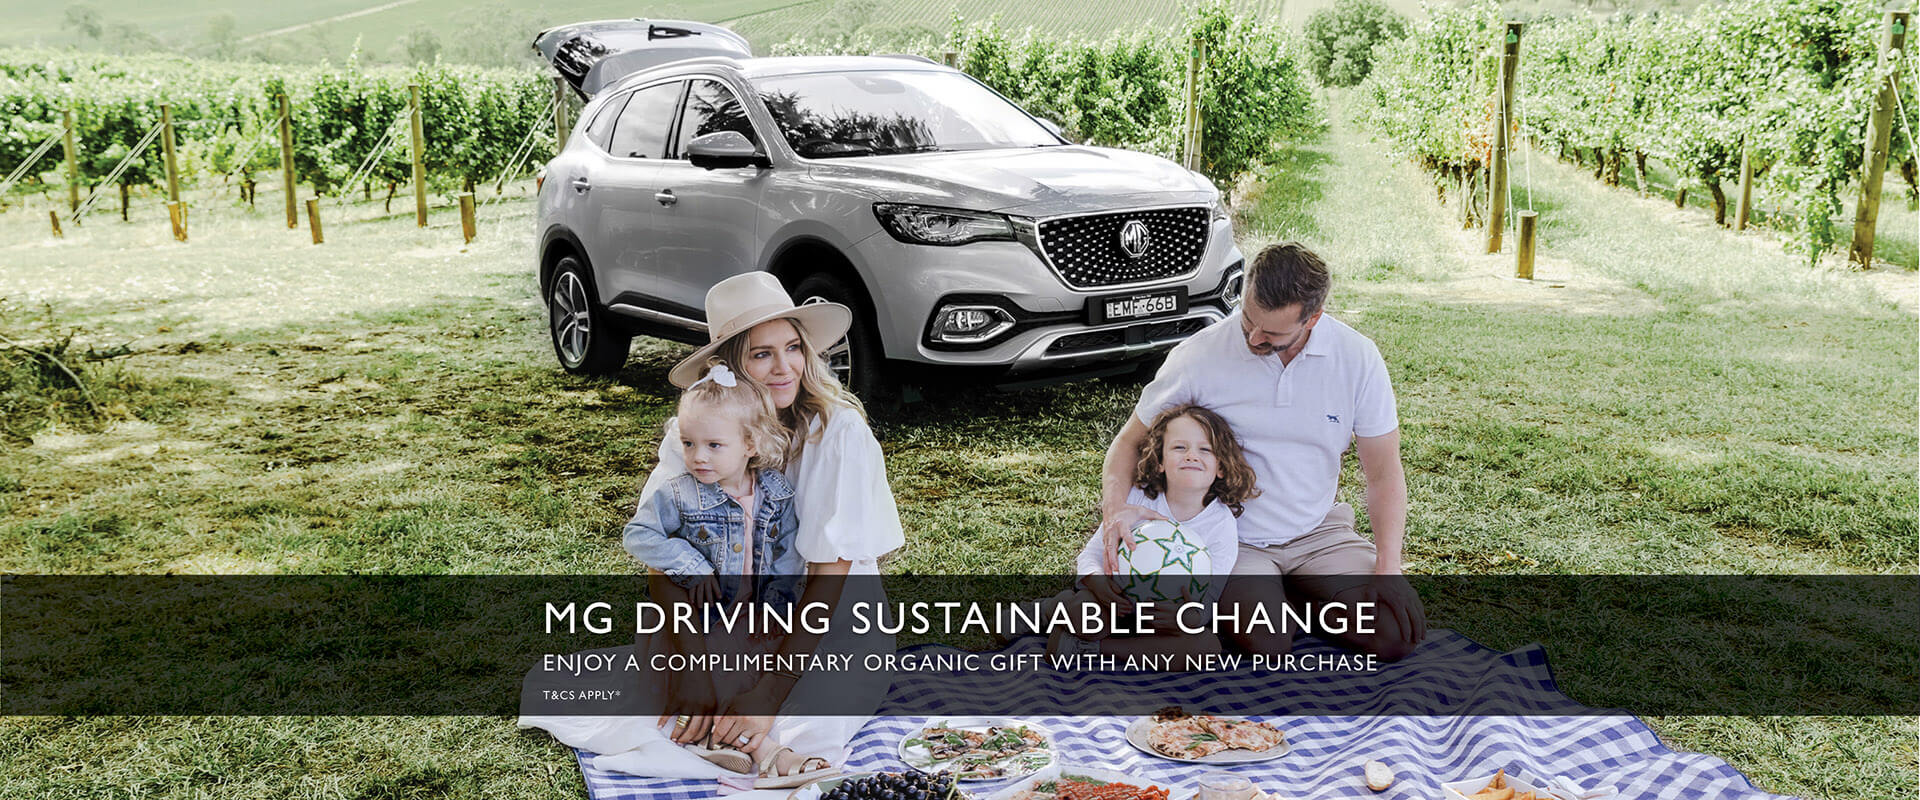 MG driving sustainable change. Enjoy a complimentary organic gift with any new purchase.